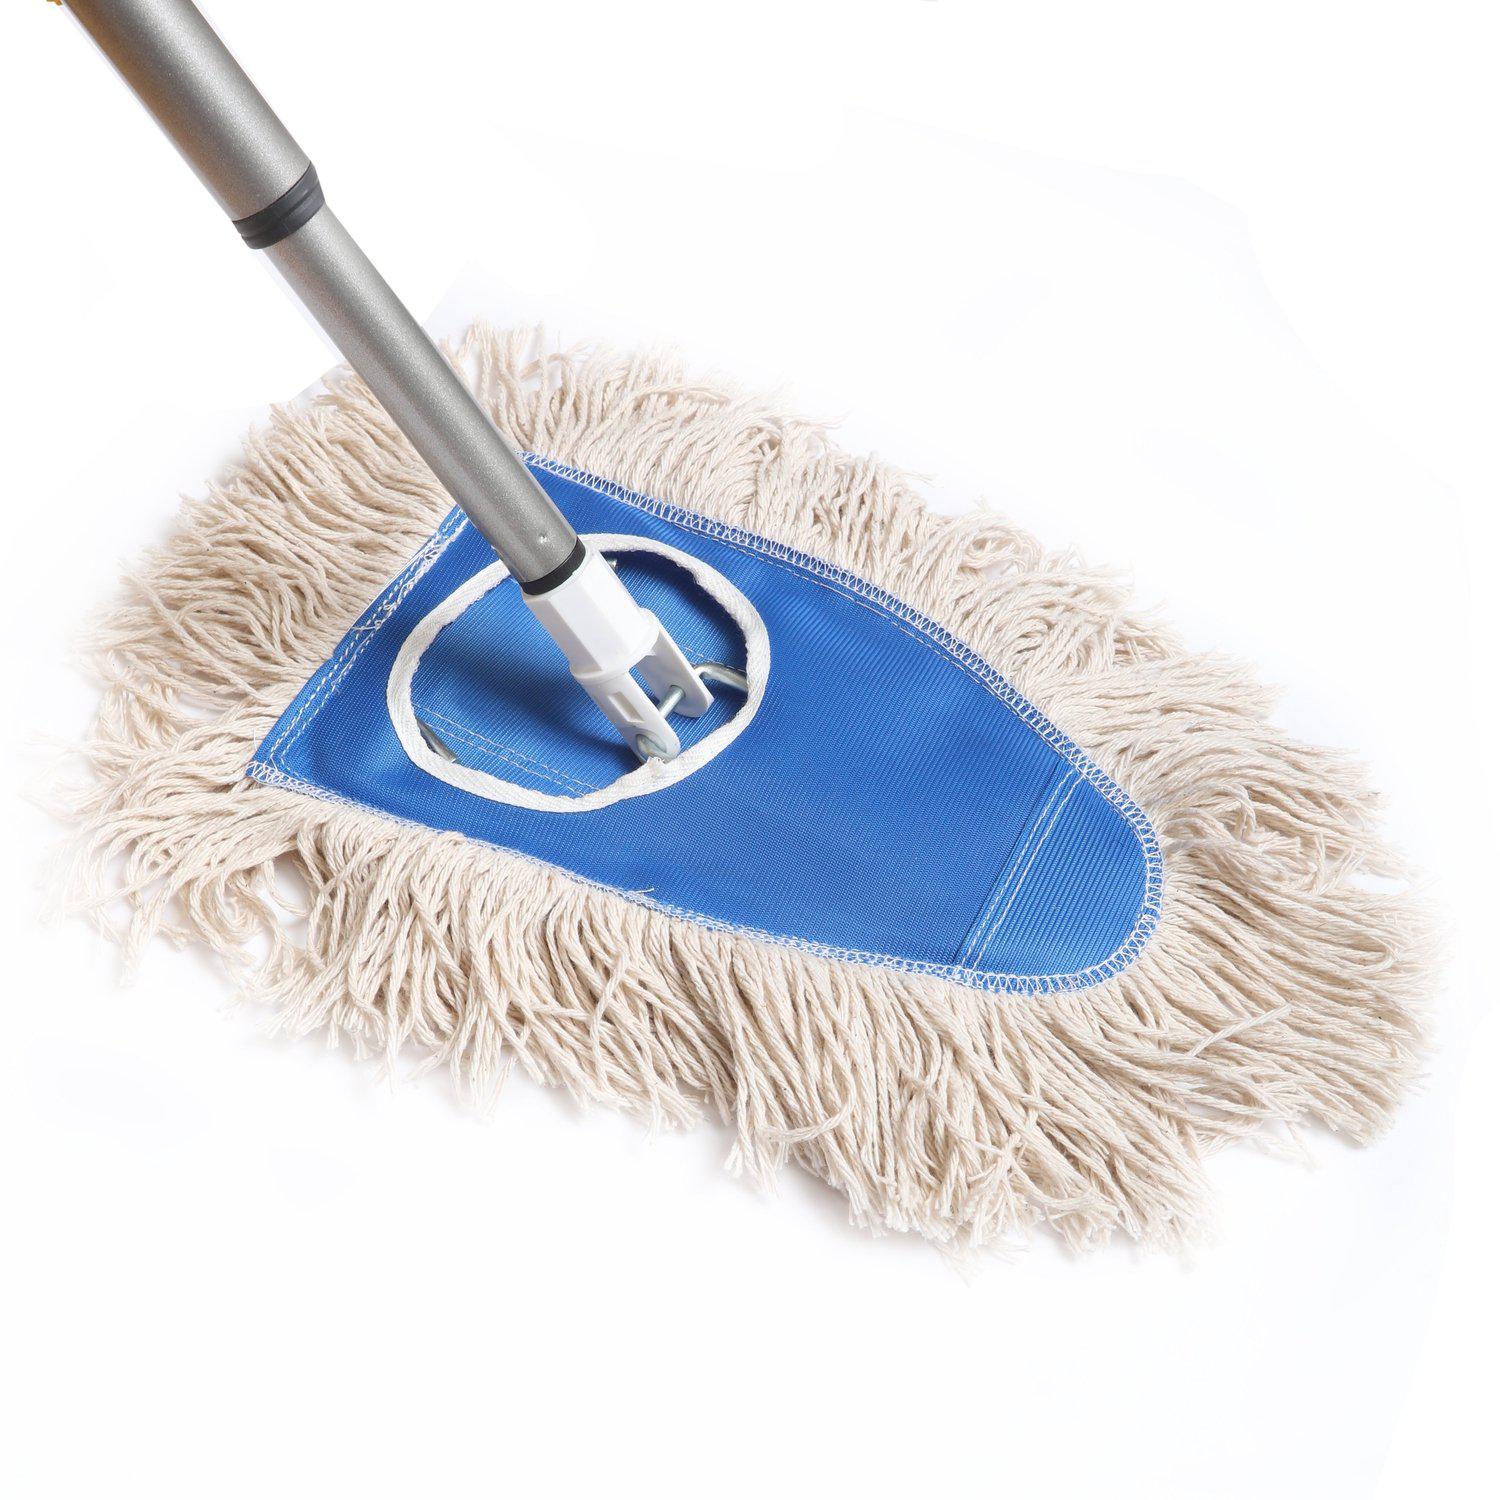 Dry Dust Mop Head With Frame & Adjustable Handle - Duster — Fuller Brush  Company